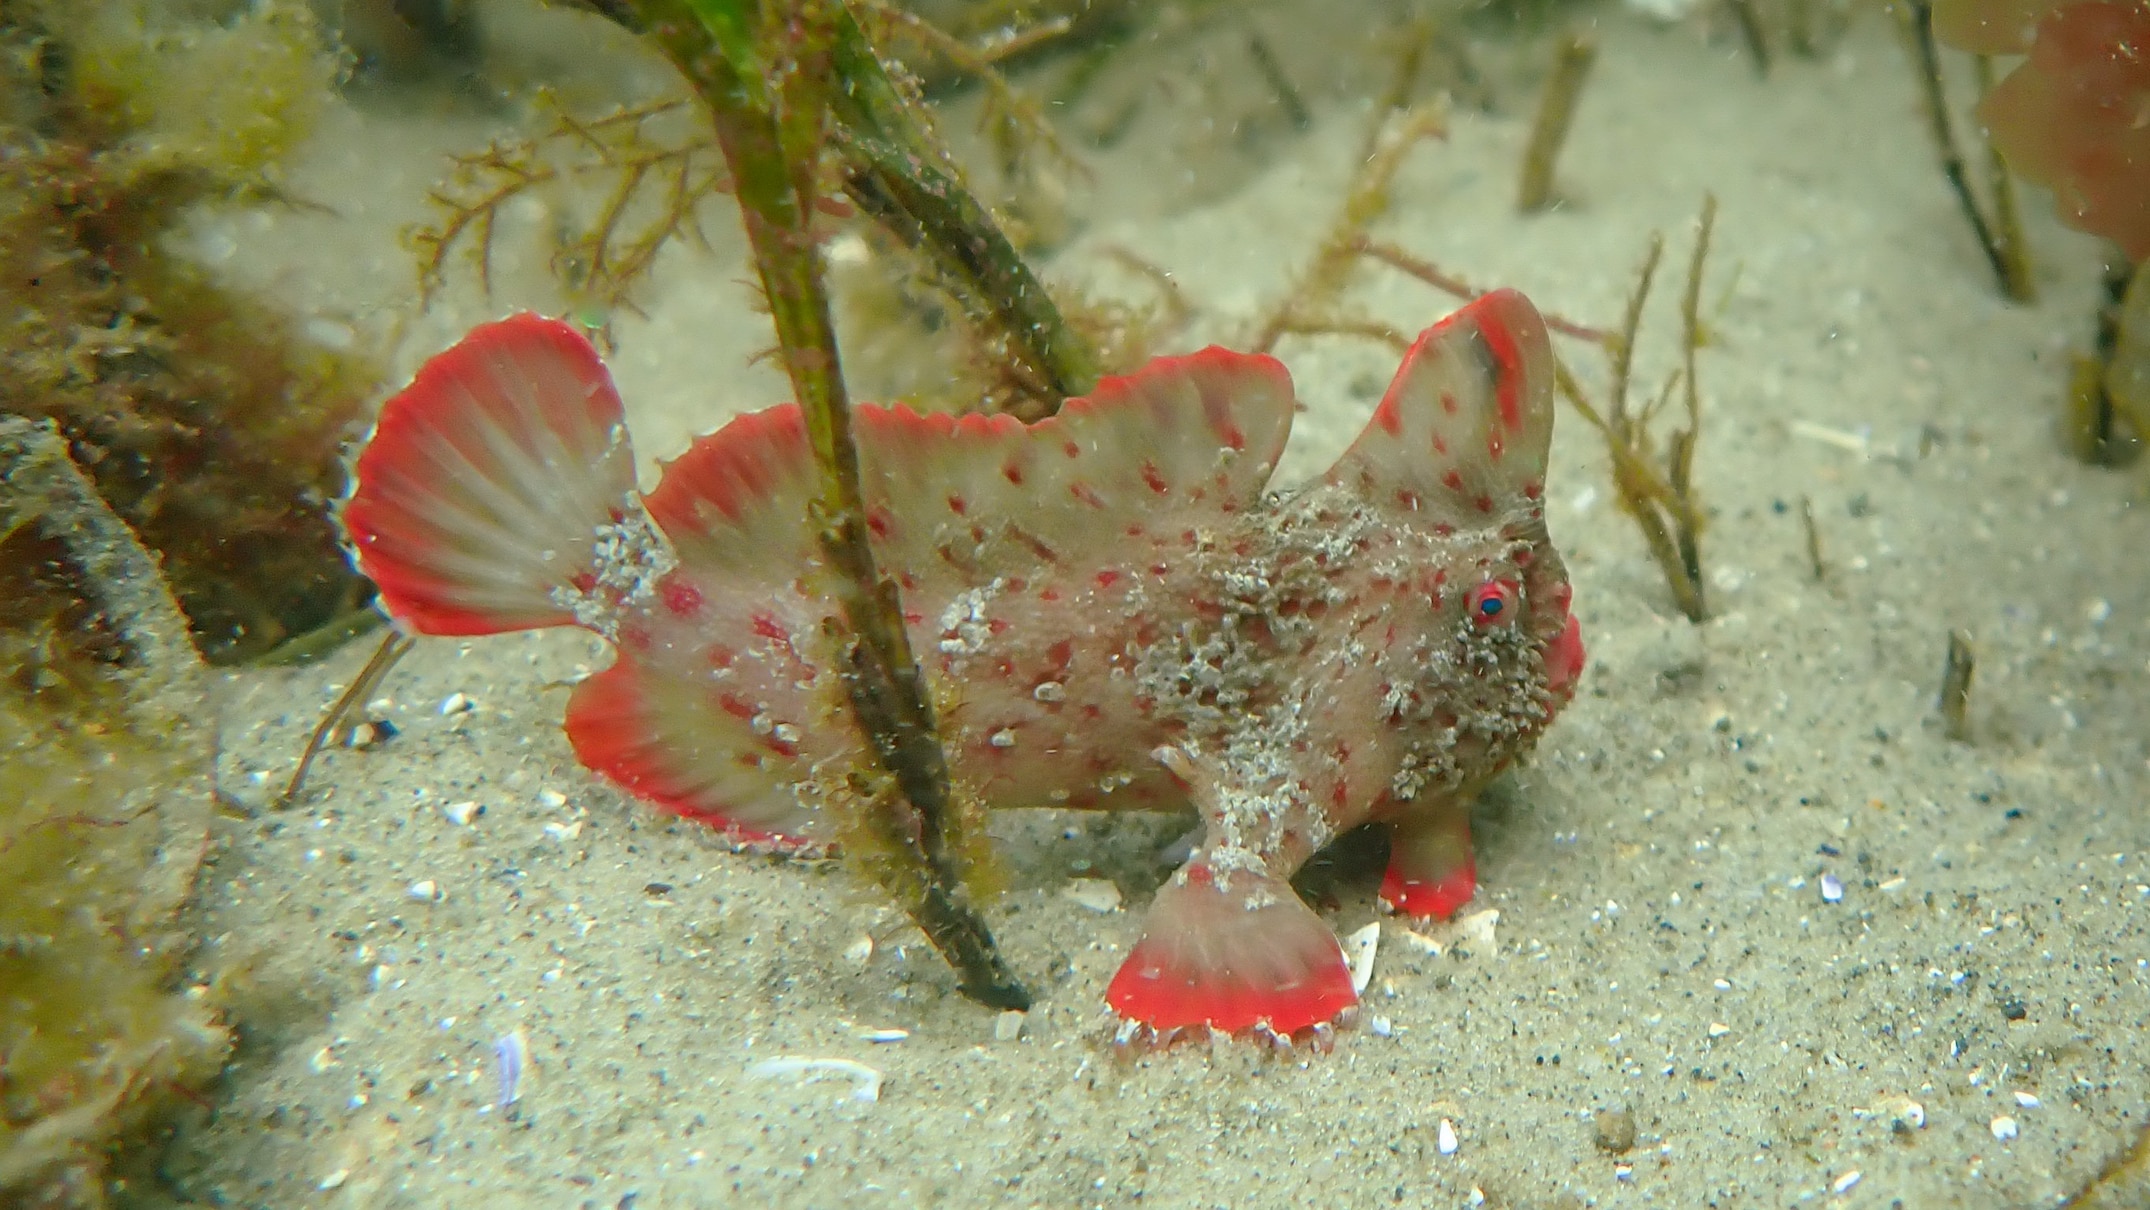 rare red handfish returned to tasmanian wild after riding out marine heatwave in tank